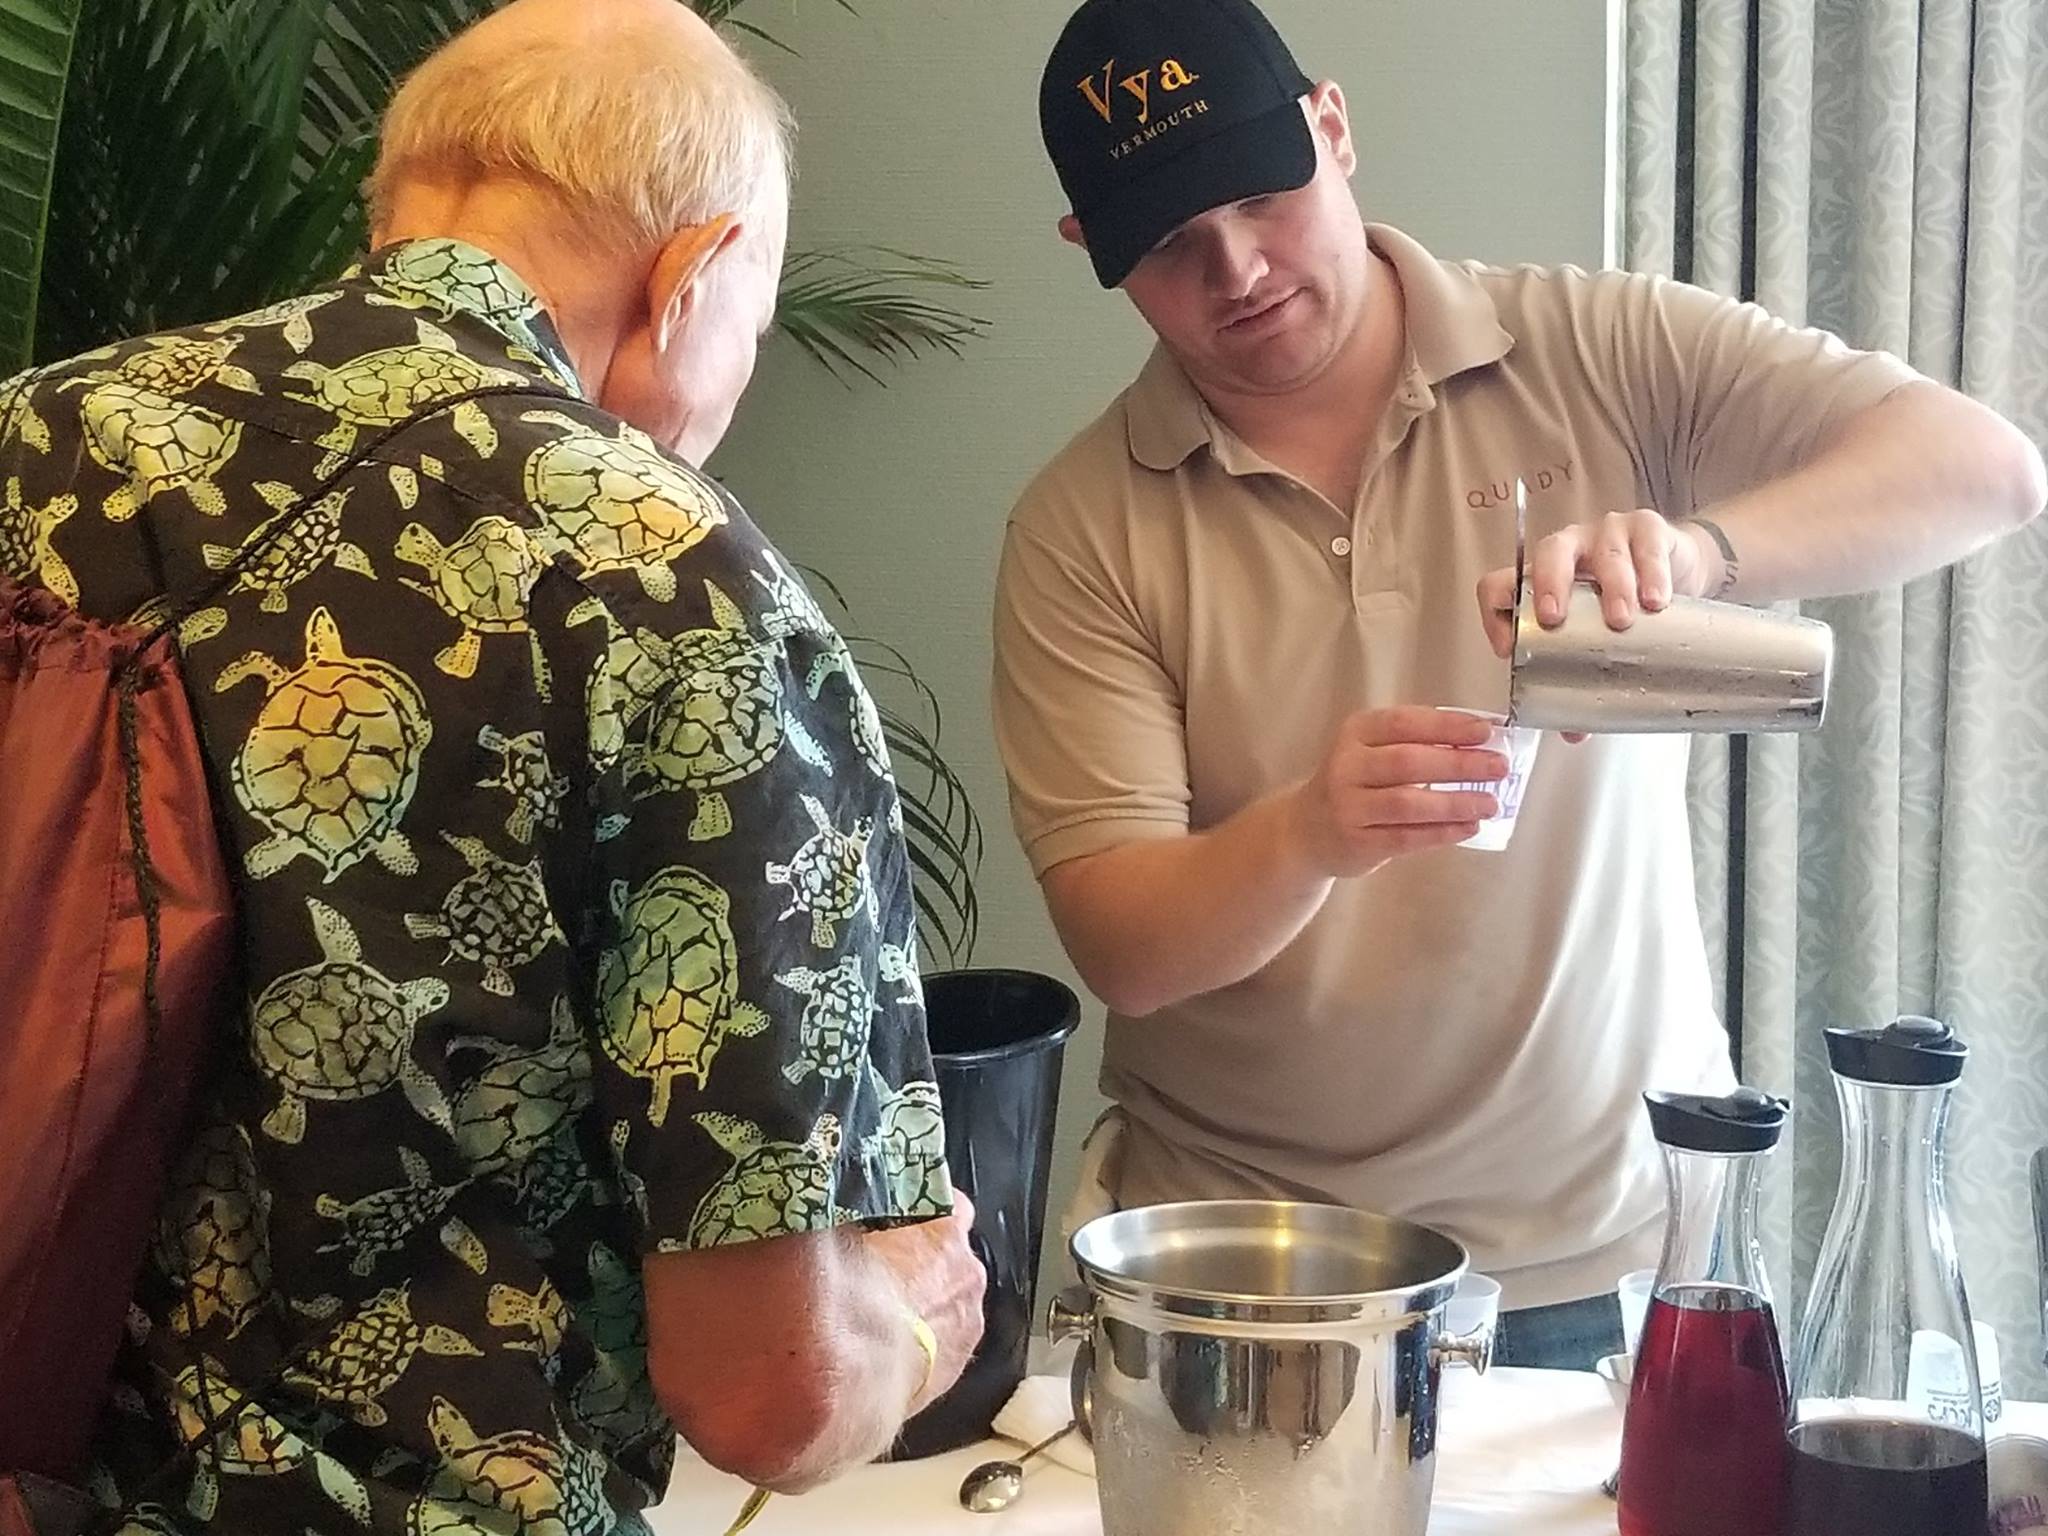 A Quady winery employee pouring a cocktail for tasting to an attendee at the Vya Vermouth tasting and seminar at tales of the cocktail.